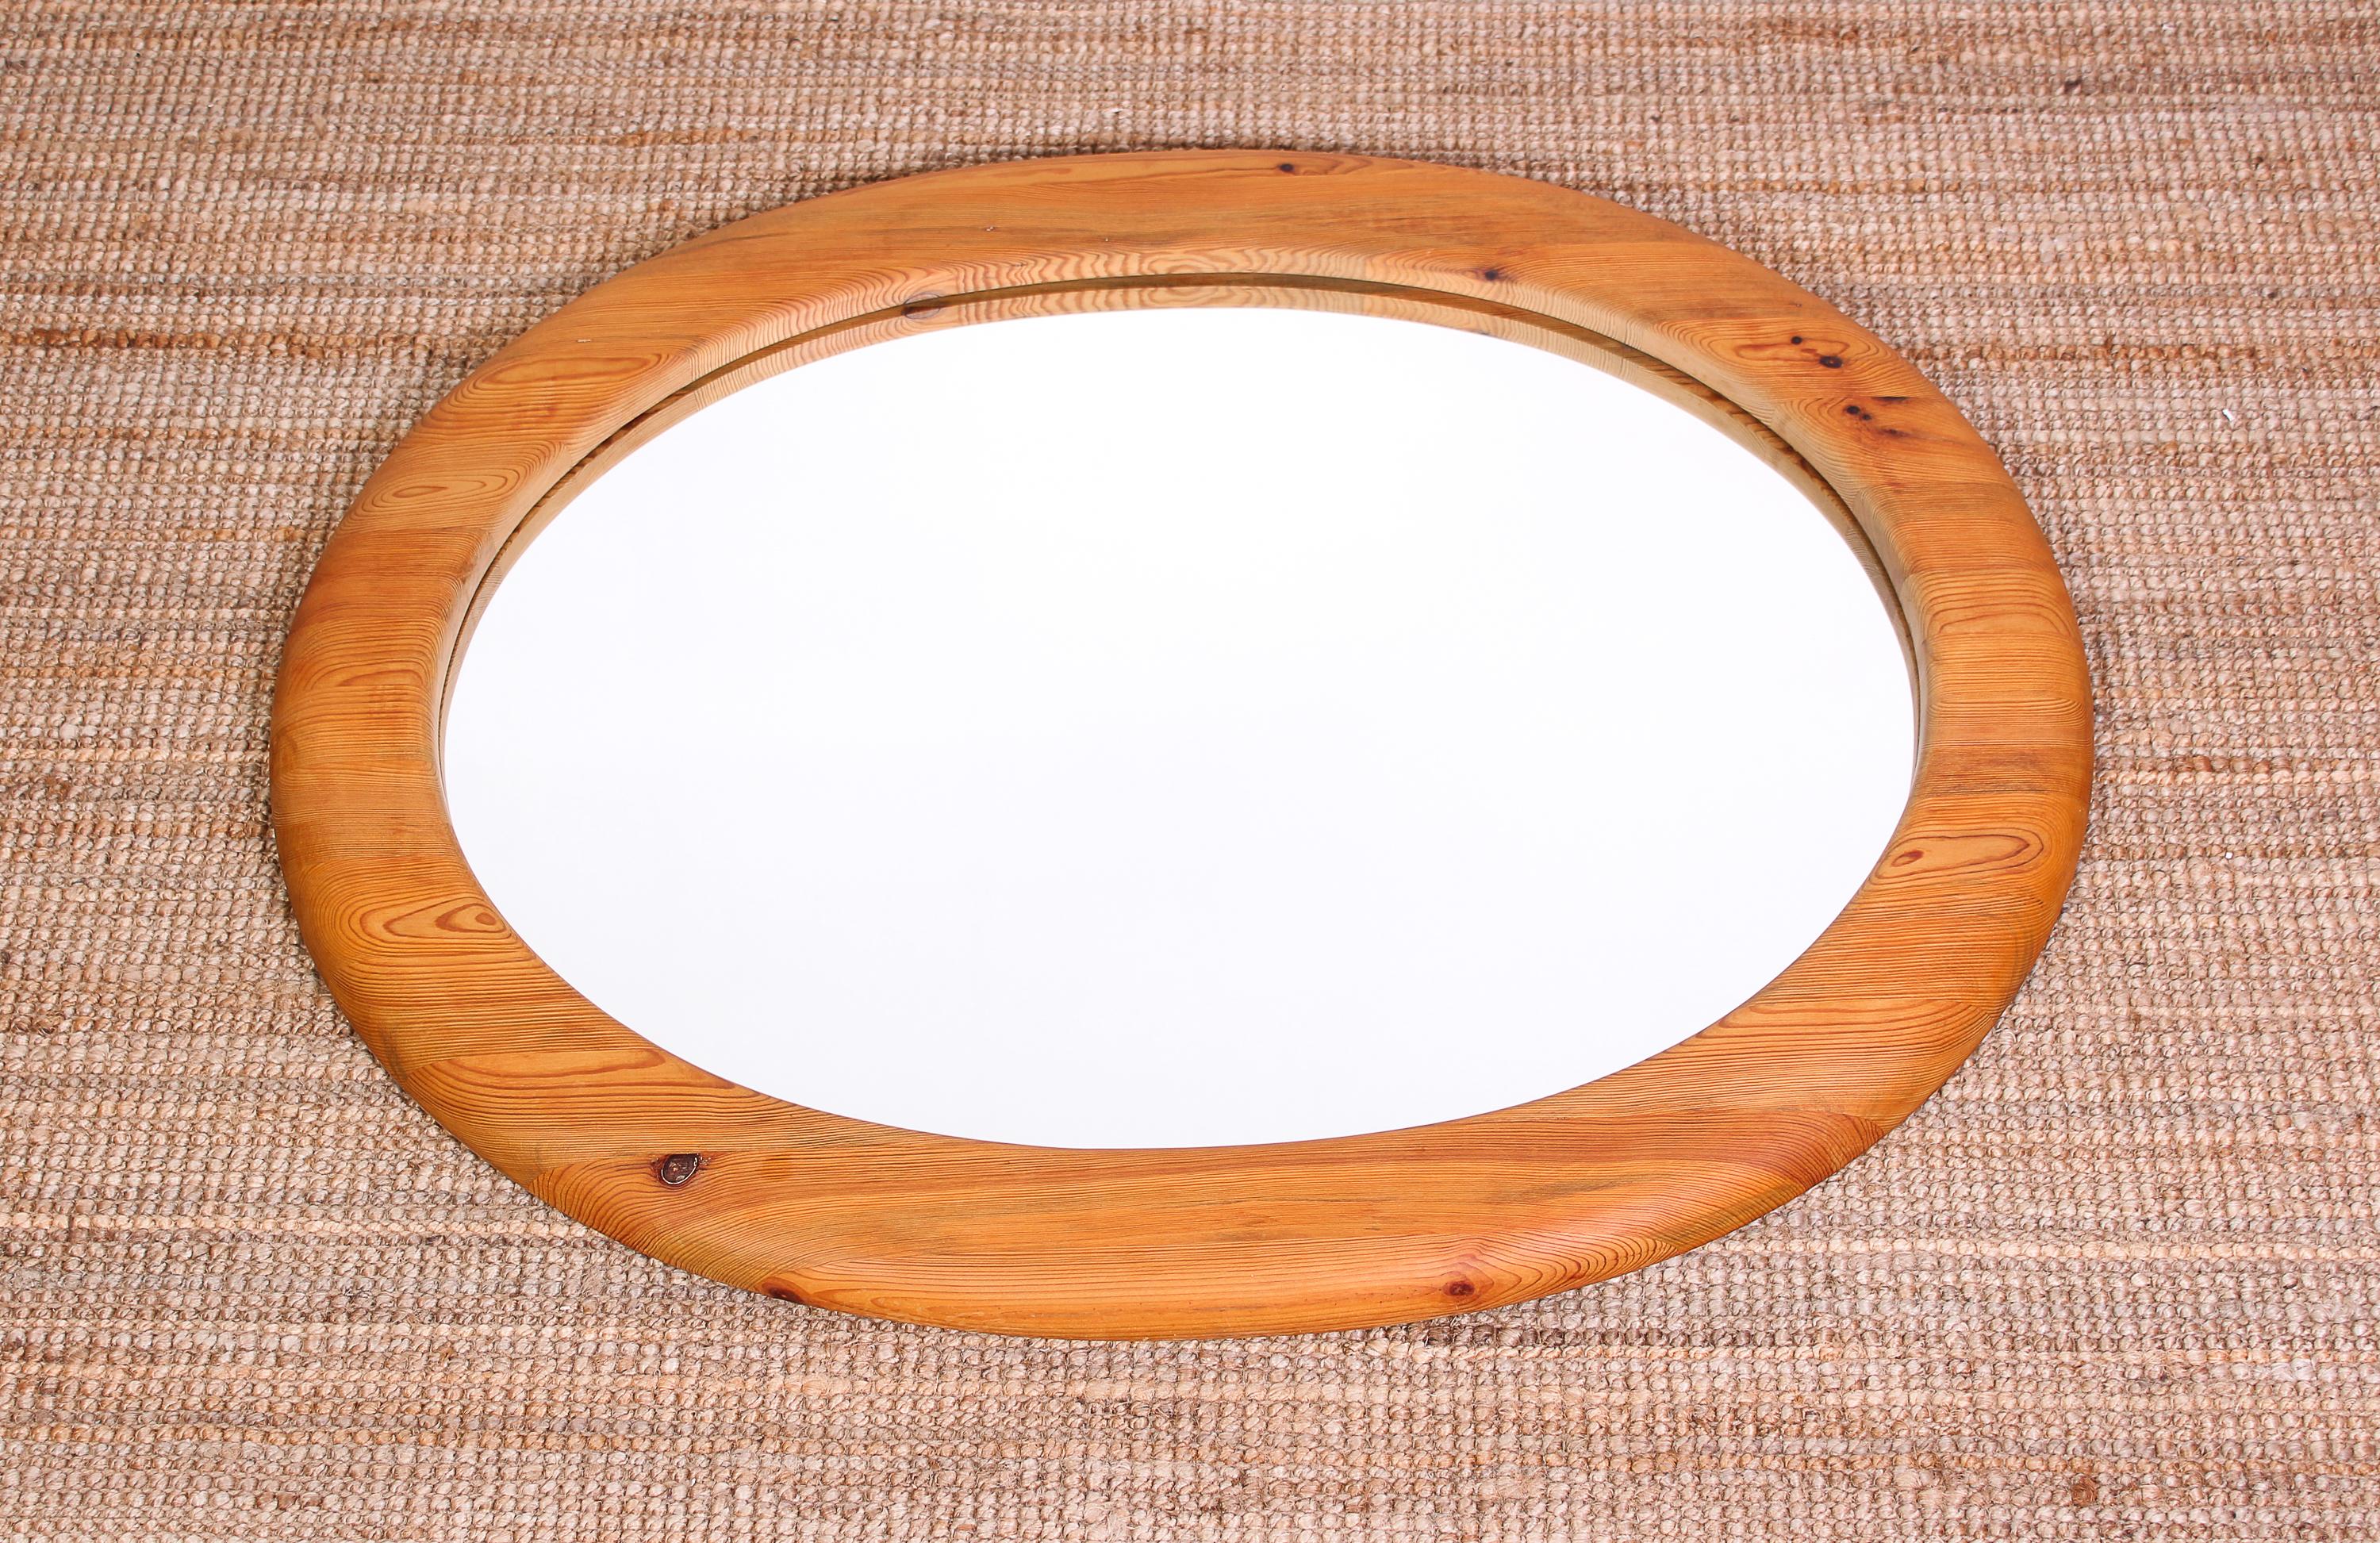 A large oval mirror made in Sweden during the 1960s. The frame is made out of solid pine, beautifully sculptured. Very good vintage condition with minor signs of usage consistent with age.